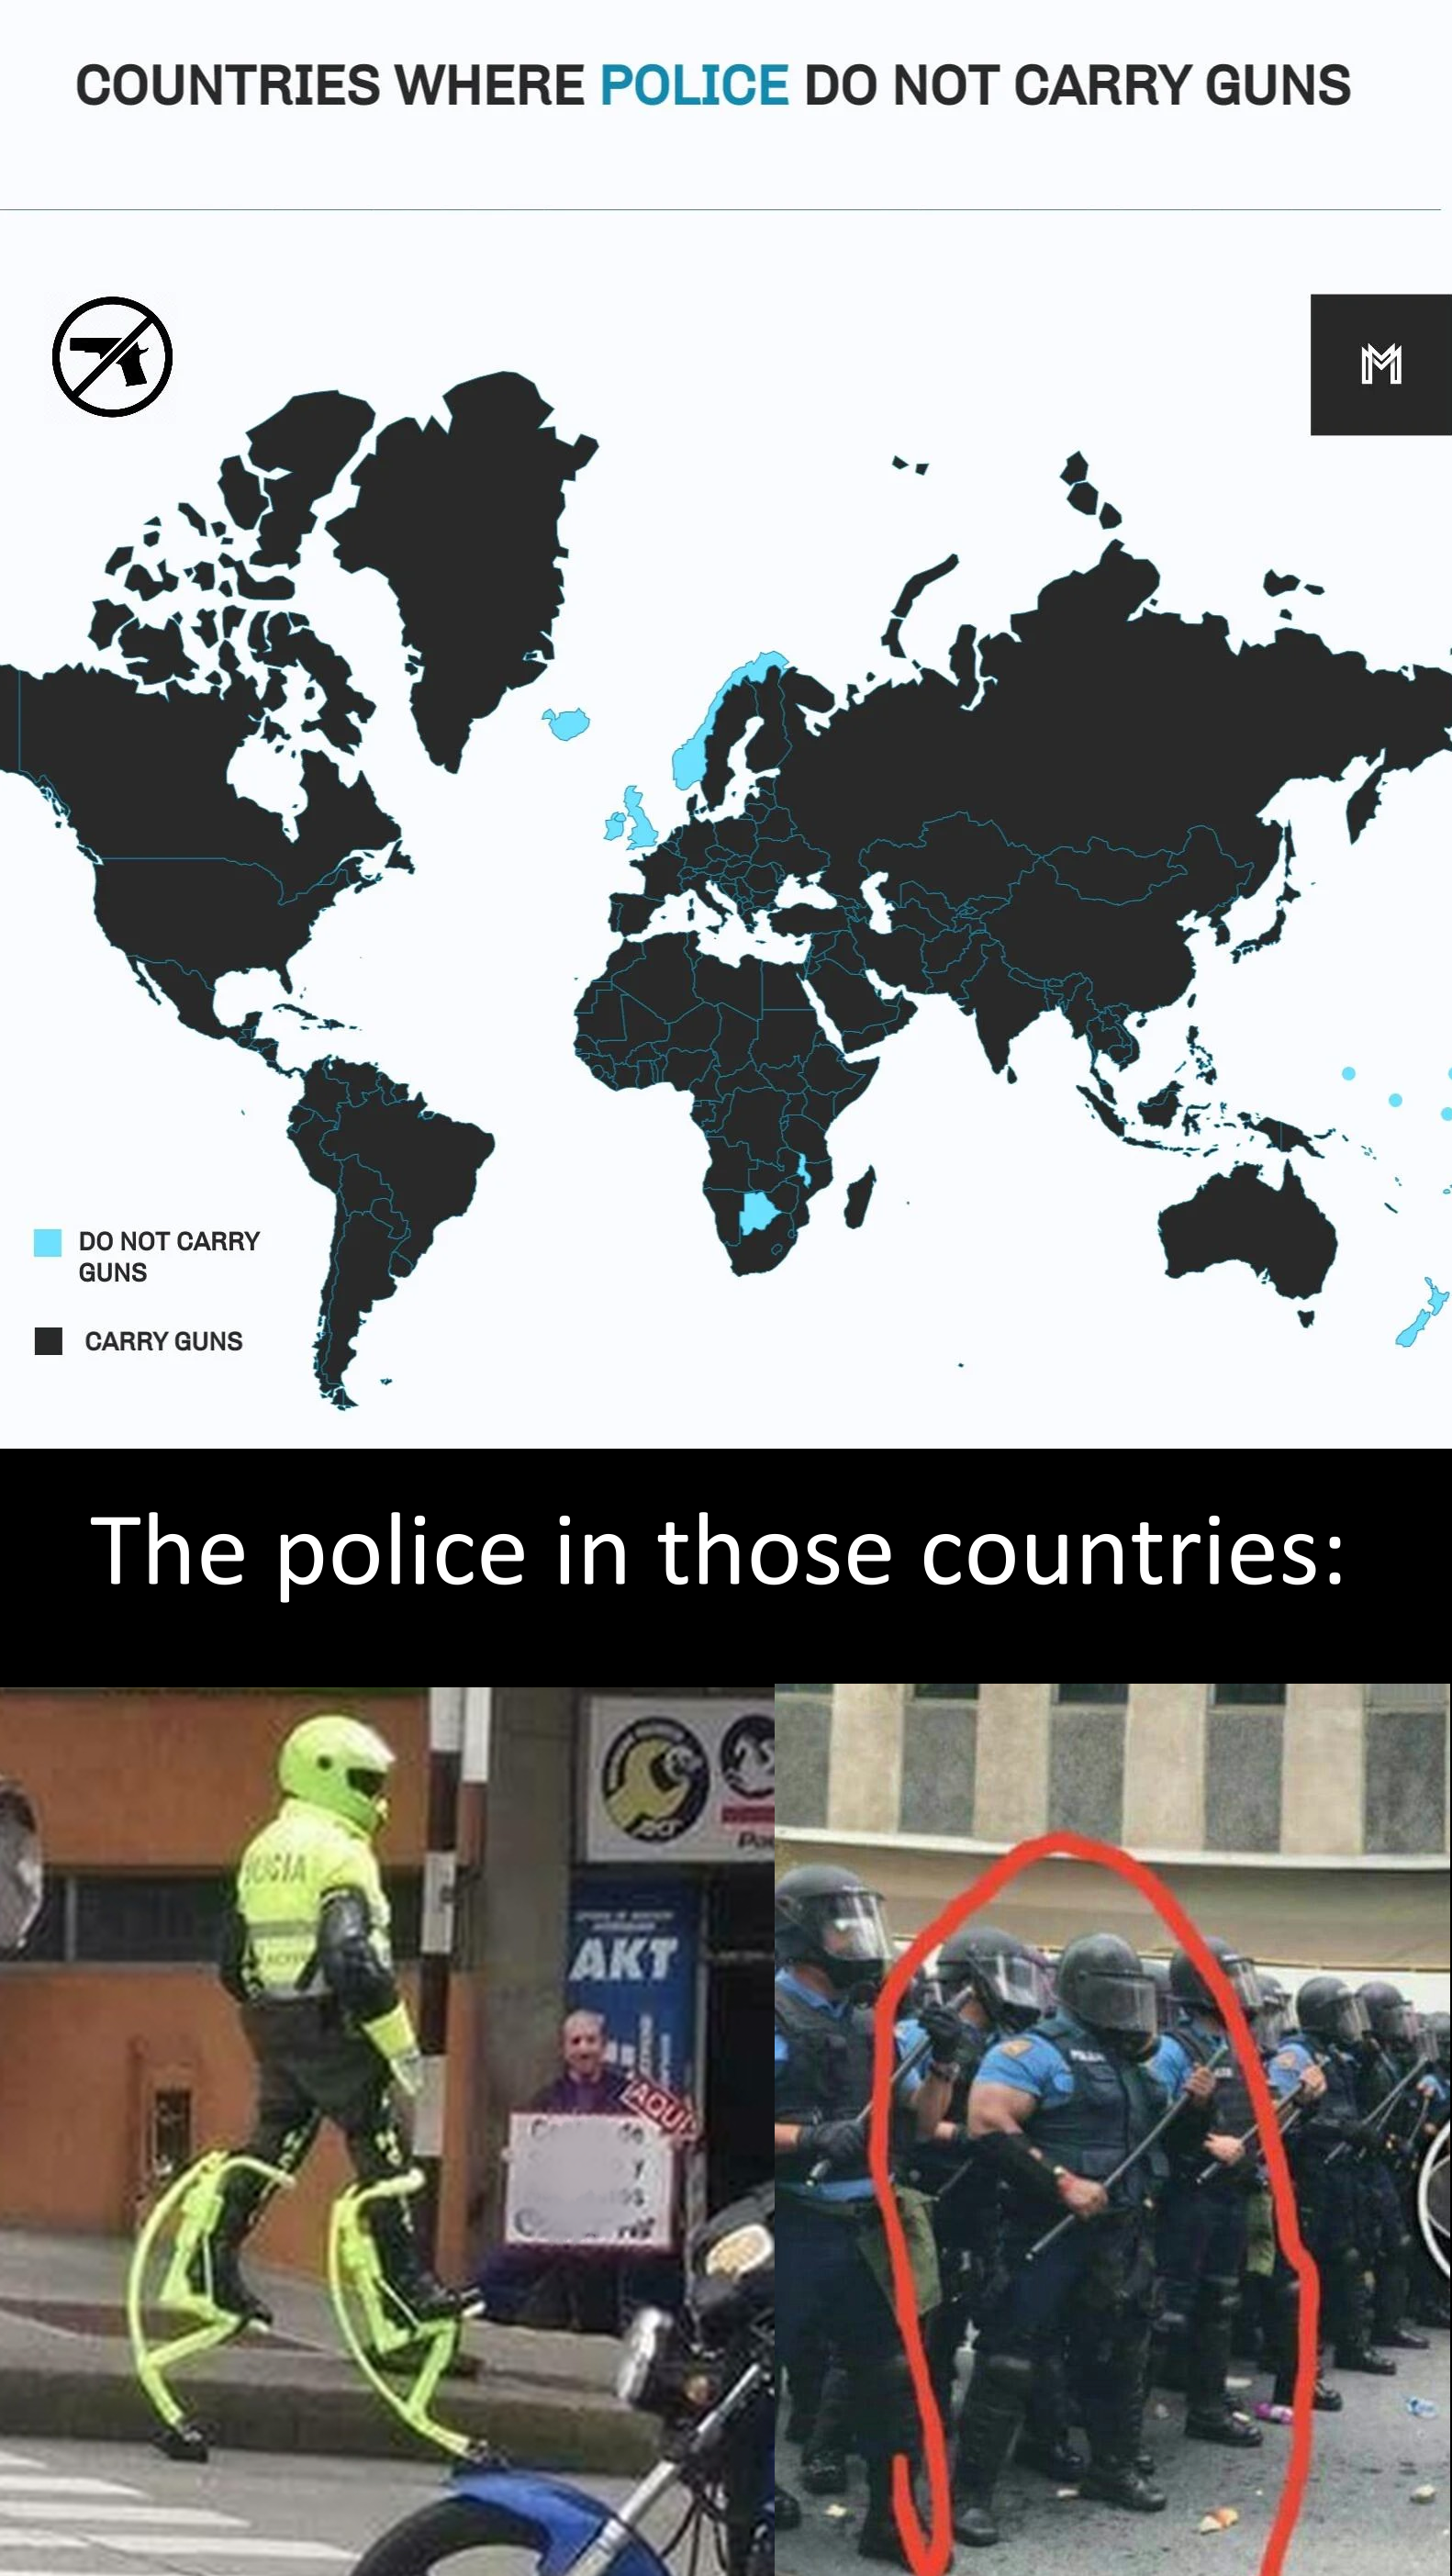 funny memes - world map png black - Countries Where Police Do Not Carry Guns Do Not Carry Gans Carry Guns The police in those countries 99 Akt